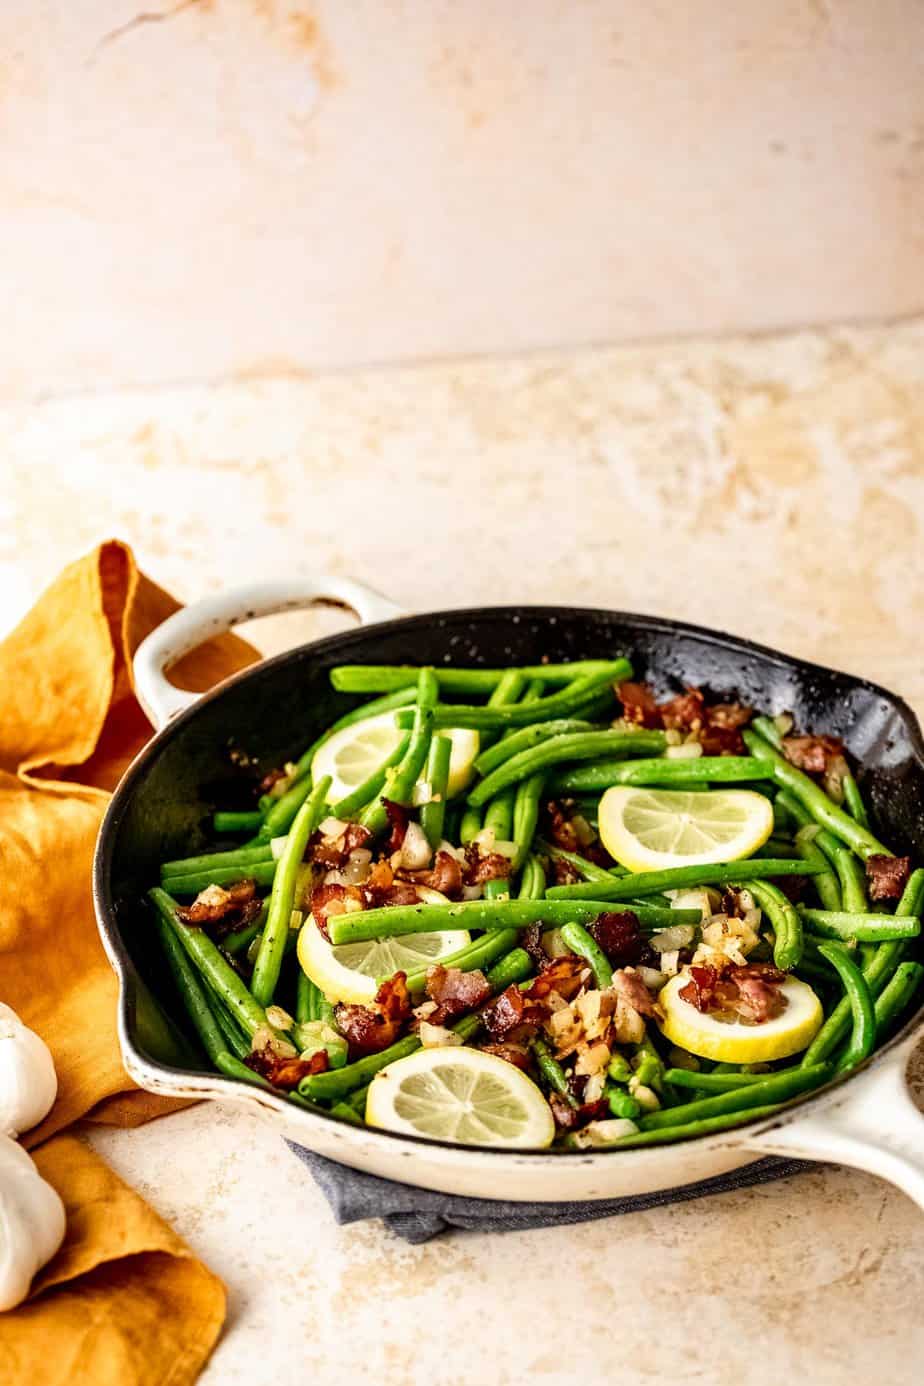 A skillet filled with crack green beans and garnished with fresh lemon.